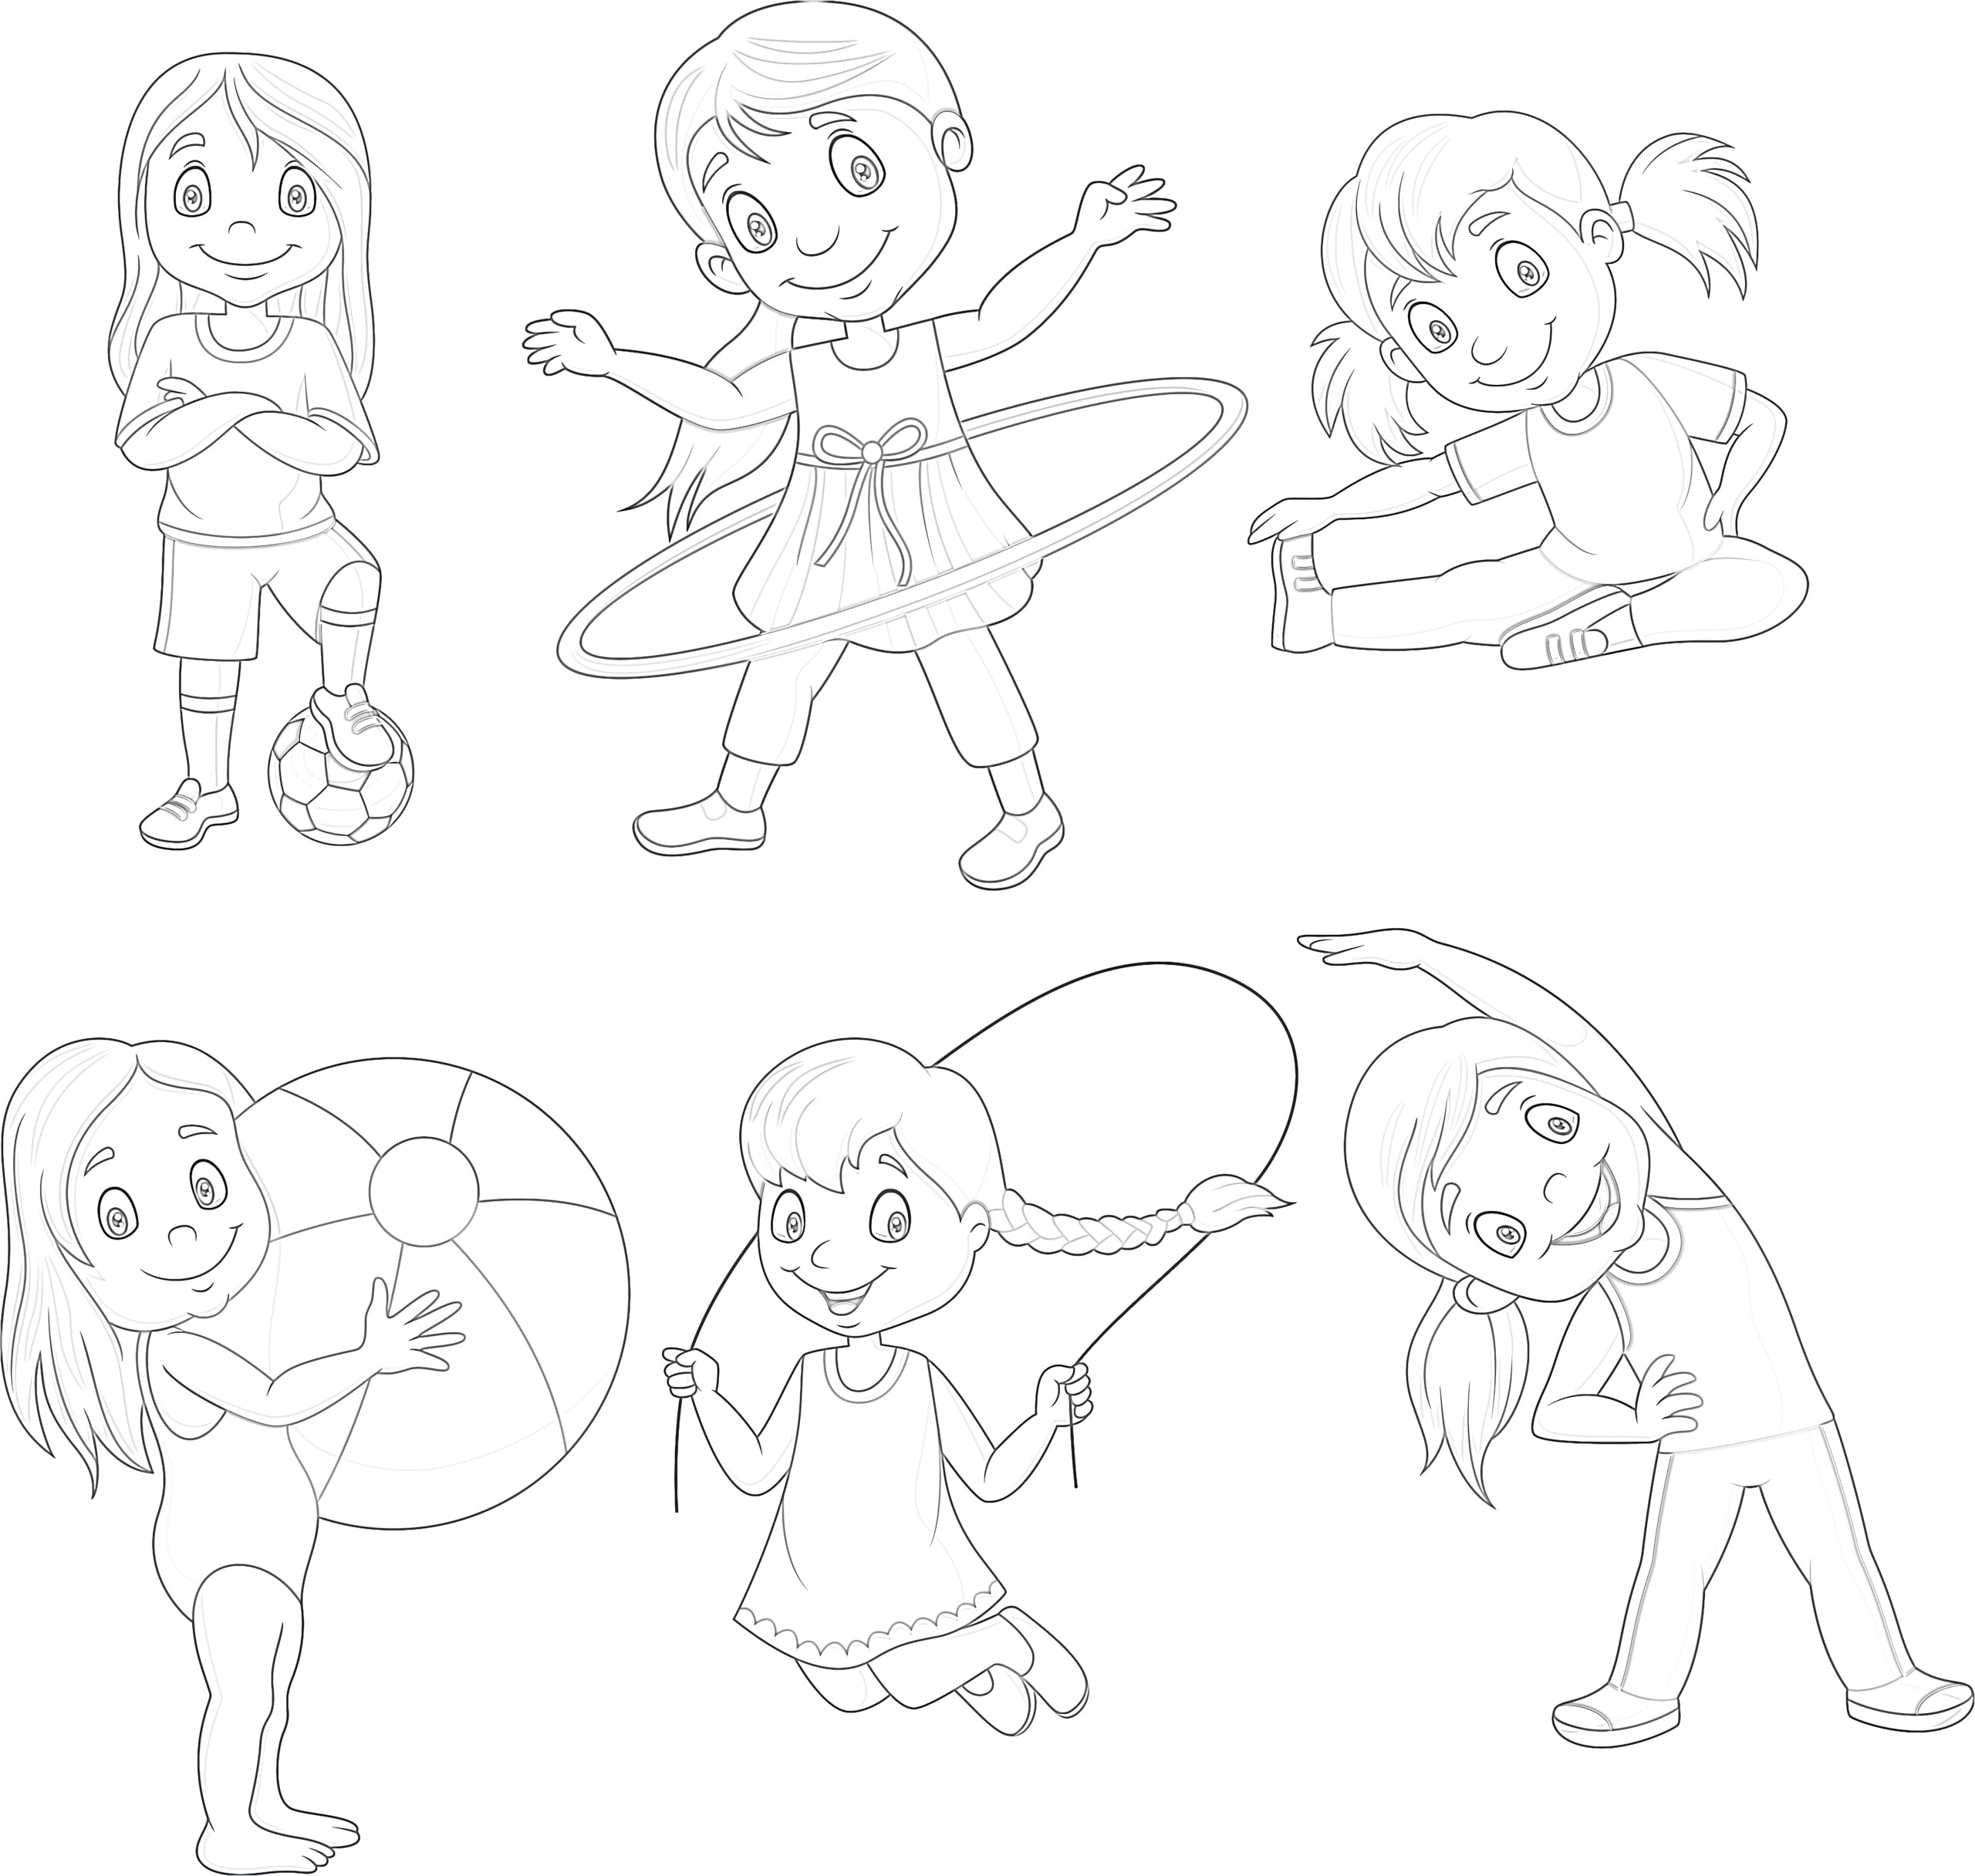 Little Girls With Different Hobbies - Coloring page